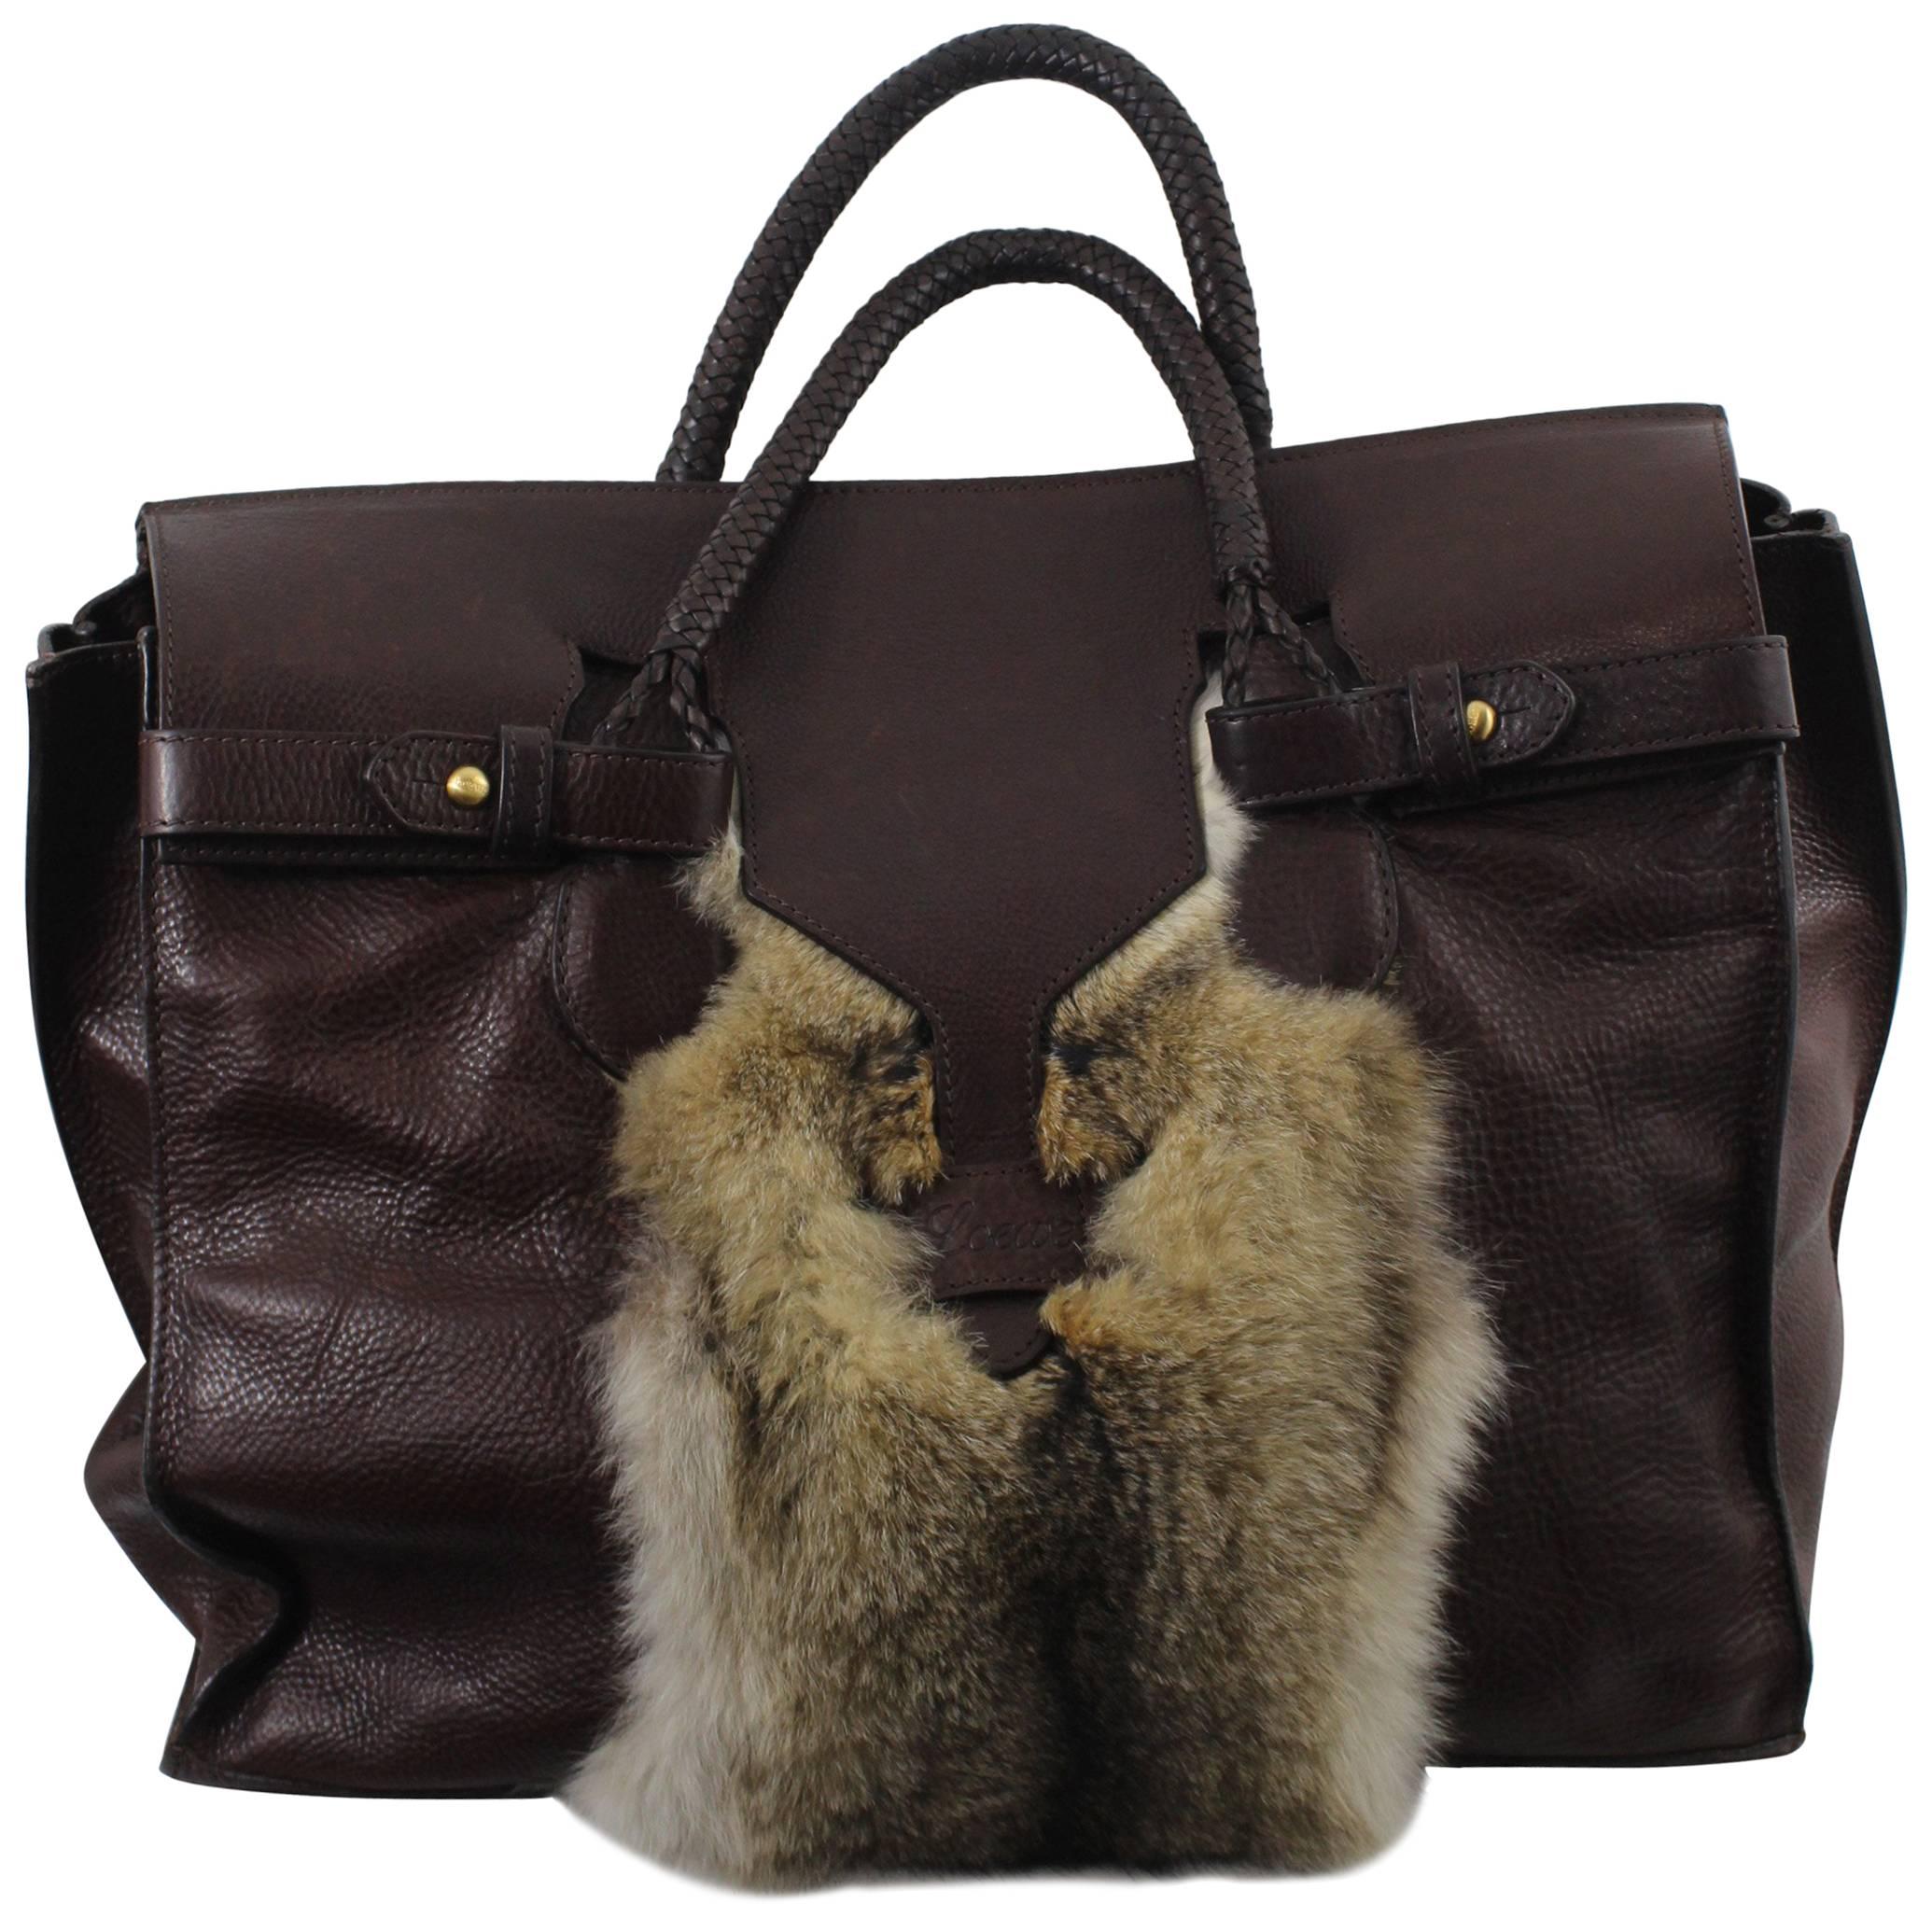 Loewe Limited Edition Leather and Fur Travel Bag, 2007  im Angebot